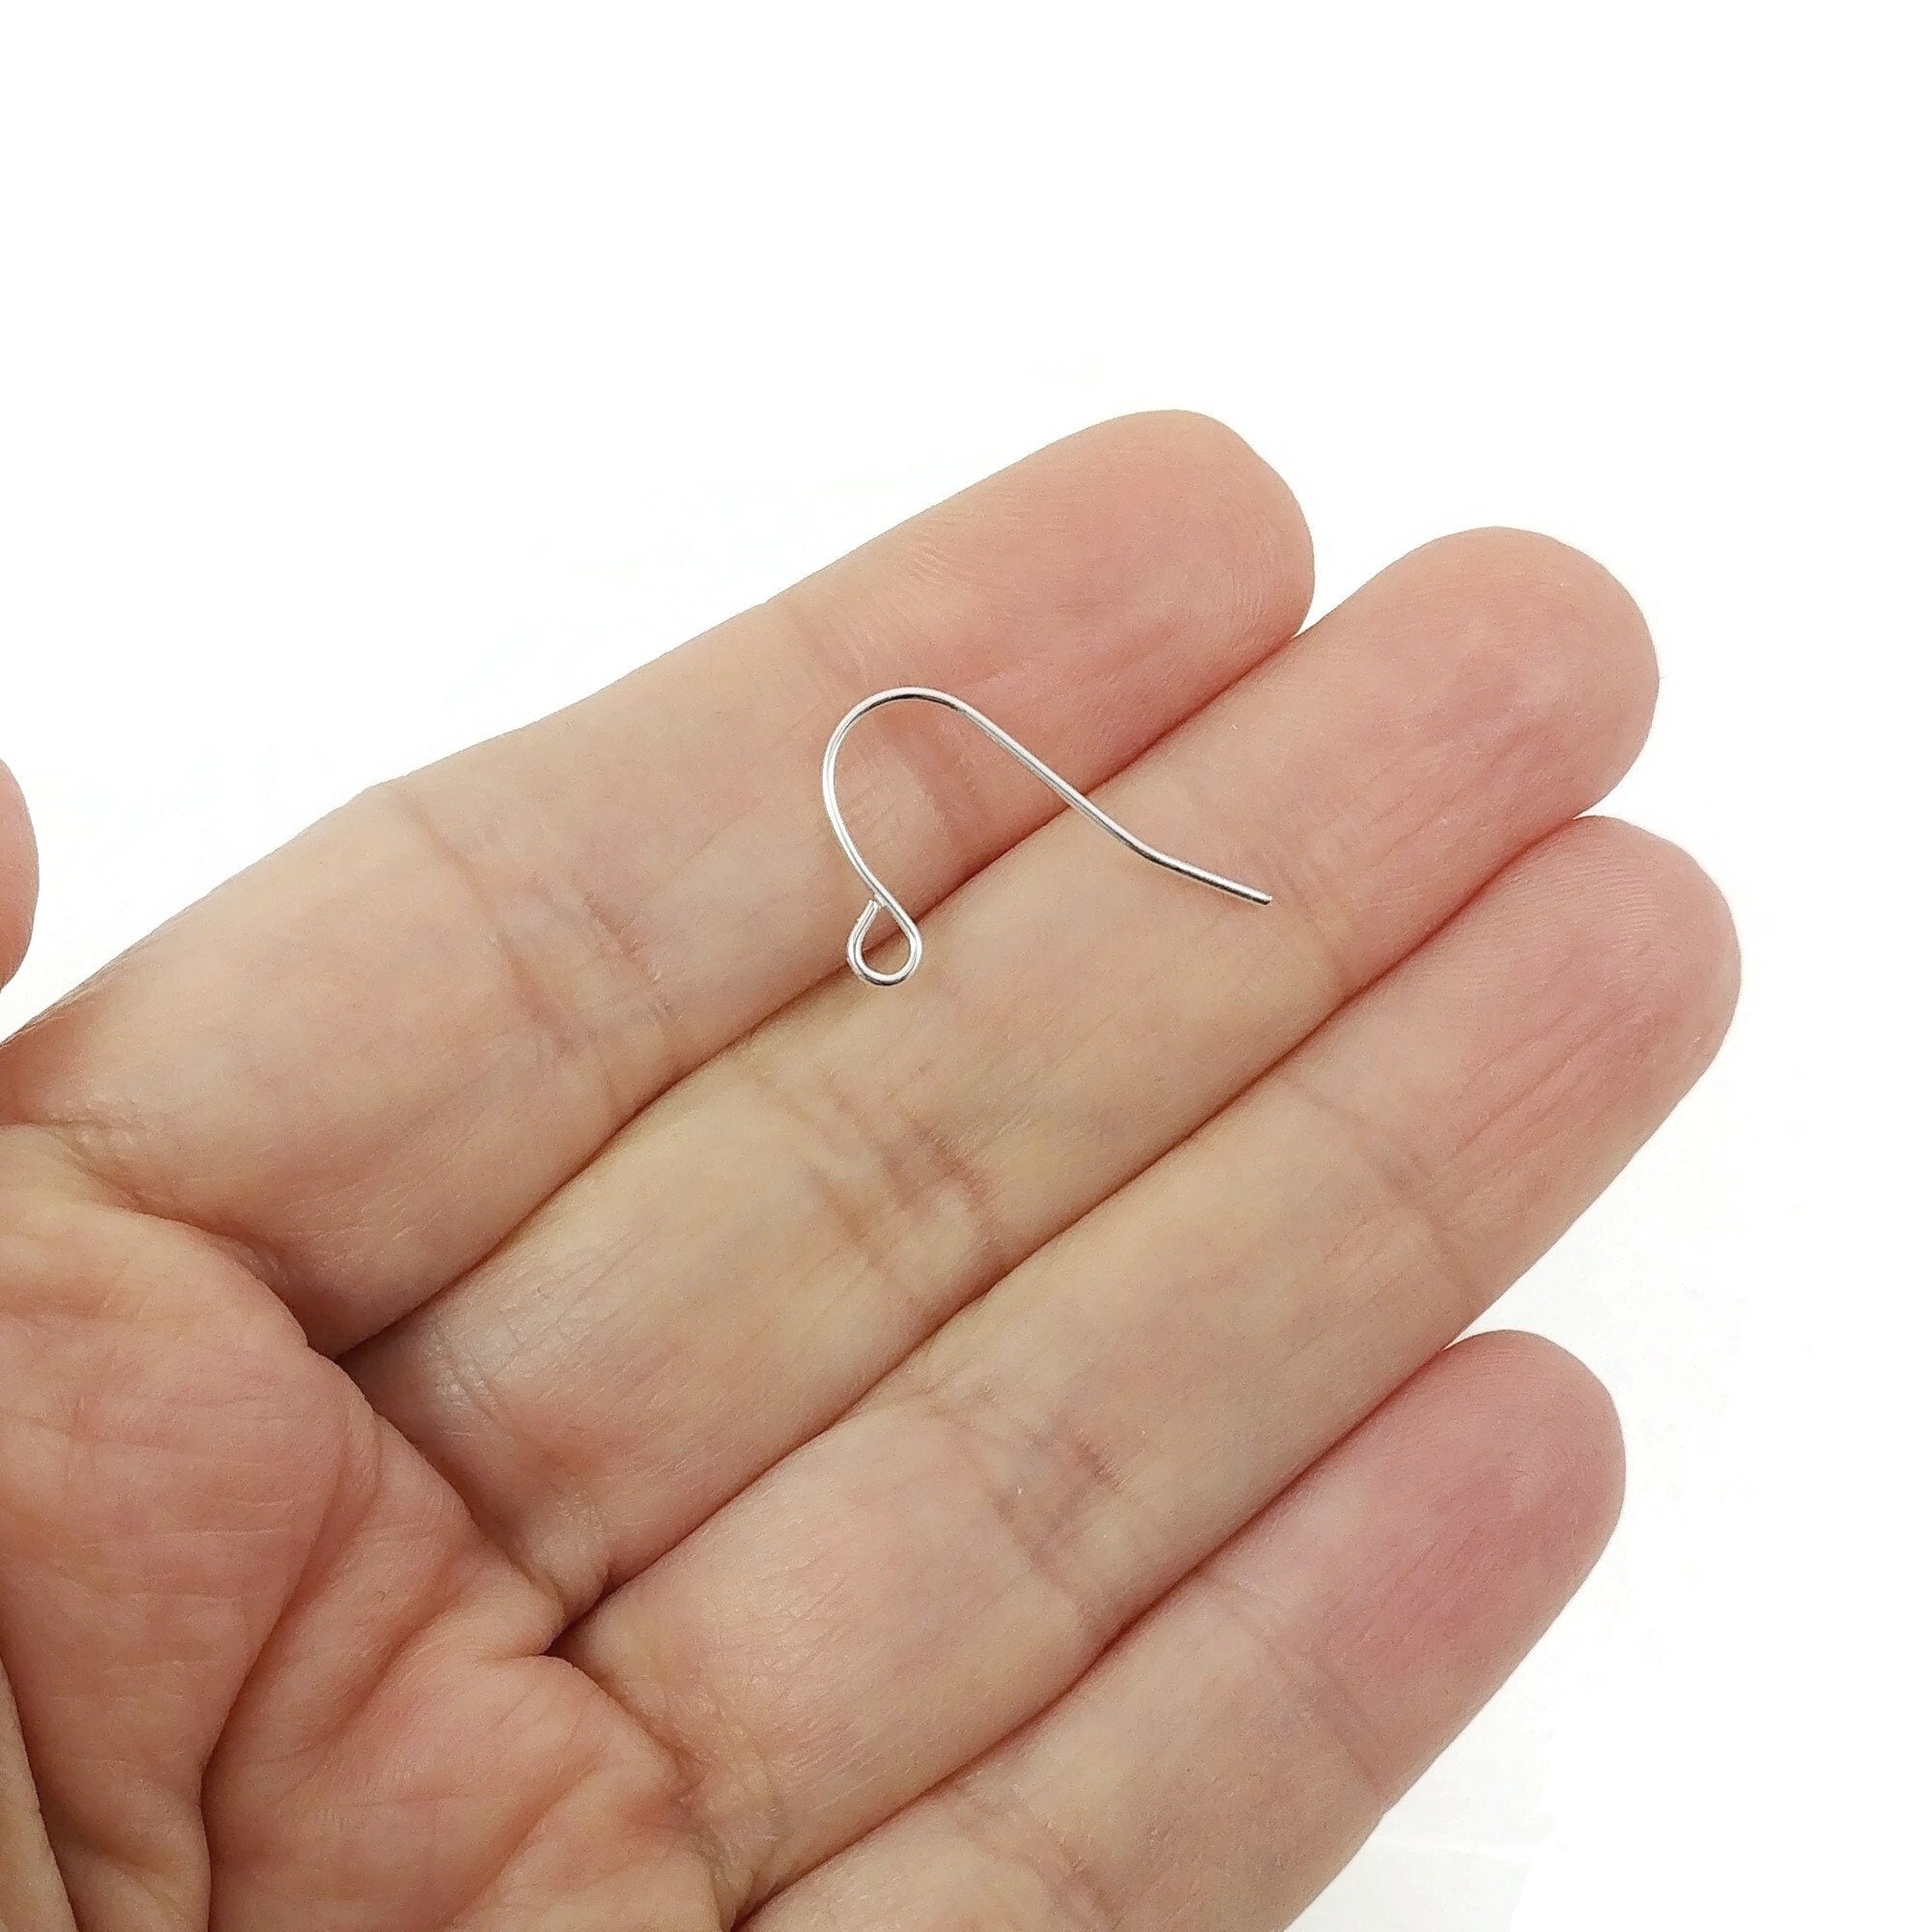 50 Silver Hypoallergenic Nickel Free Titanium French Hook Earring Findings  with Open Loop Ring